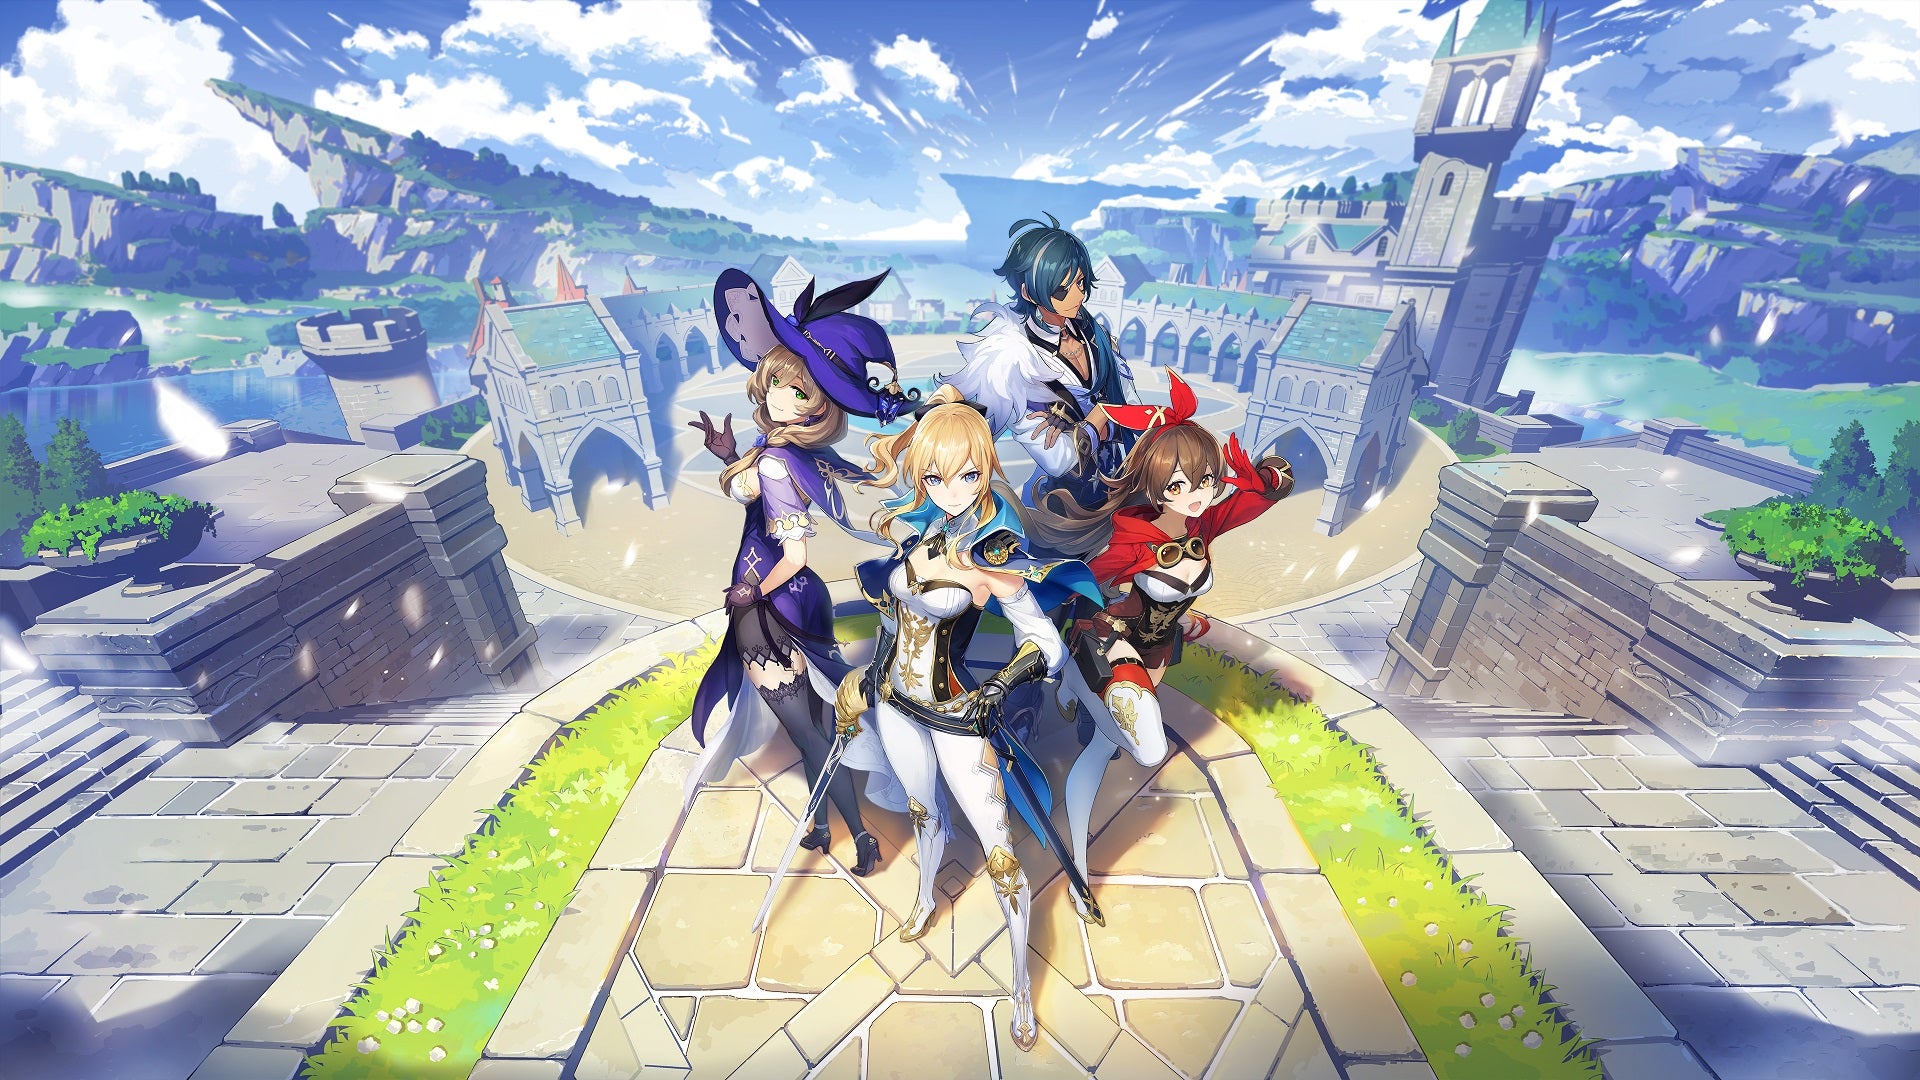 One of the earliest official images for Genshin Impact. It shows starter characters Lisa, Kaeya, and Amber along with Jean, with the city state of Mondstadt in the background.